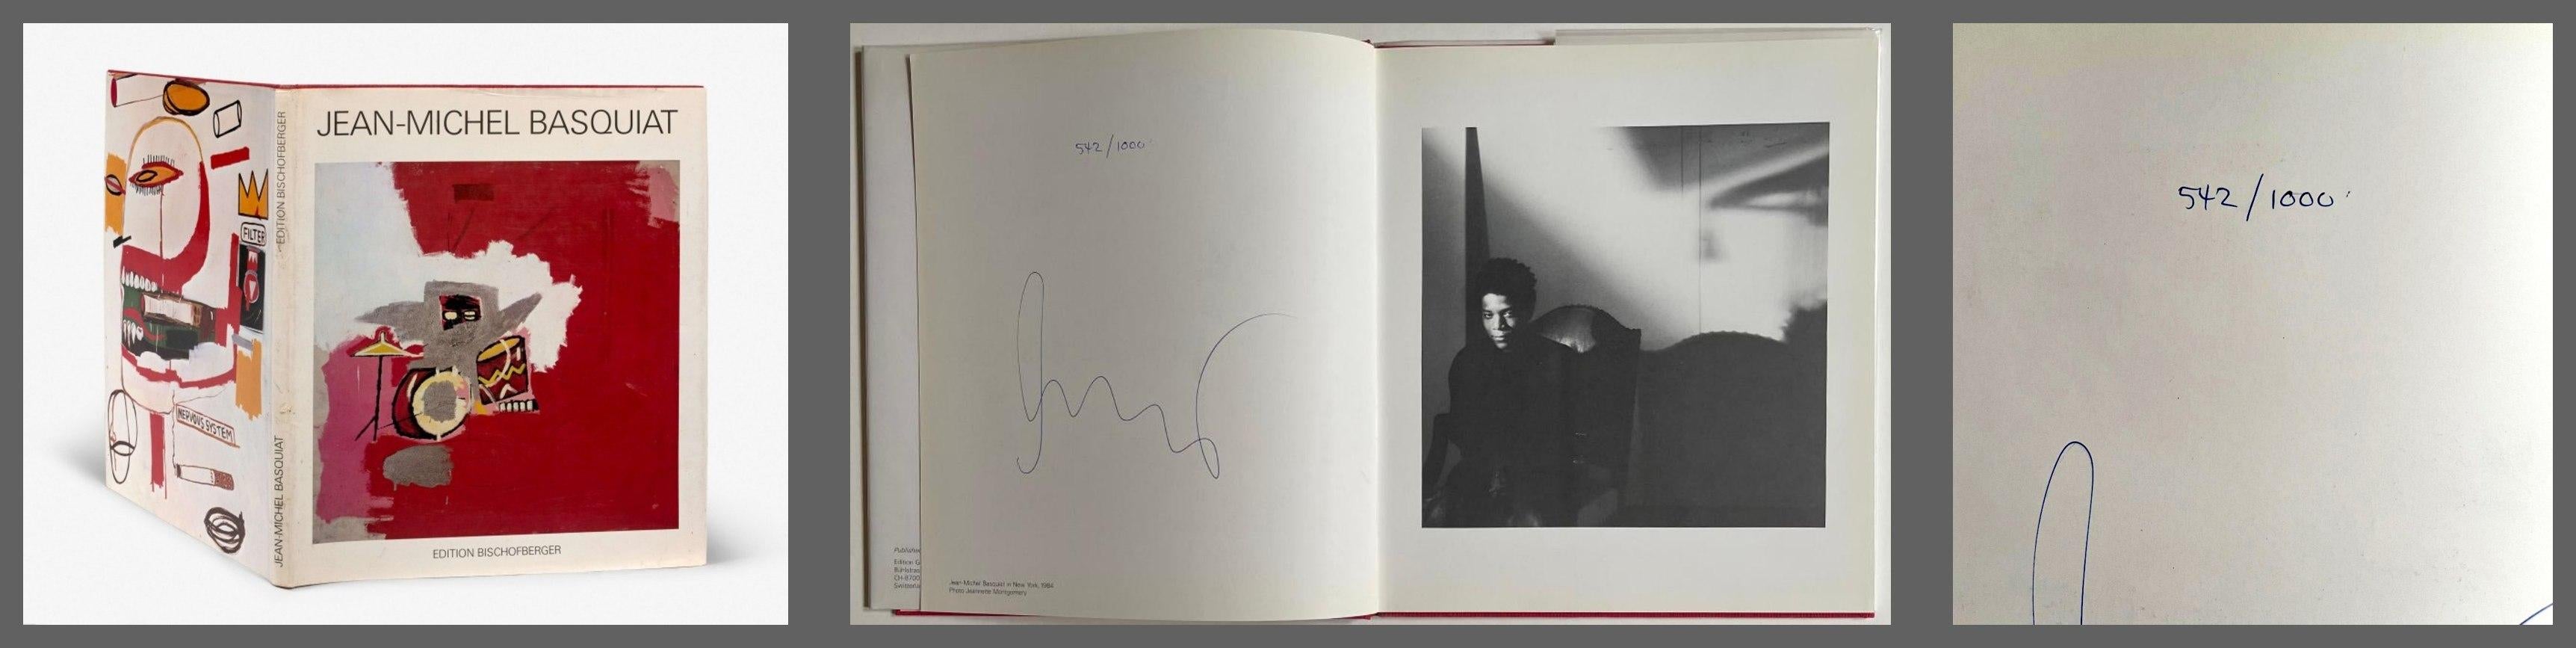 Jean-Michel Basquiat, (monograph, Hand signed and numbered by Basquiat)